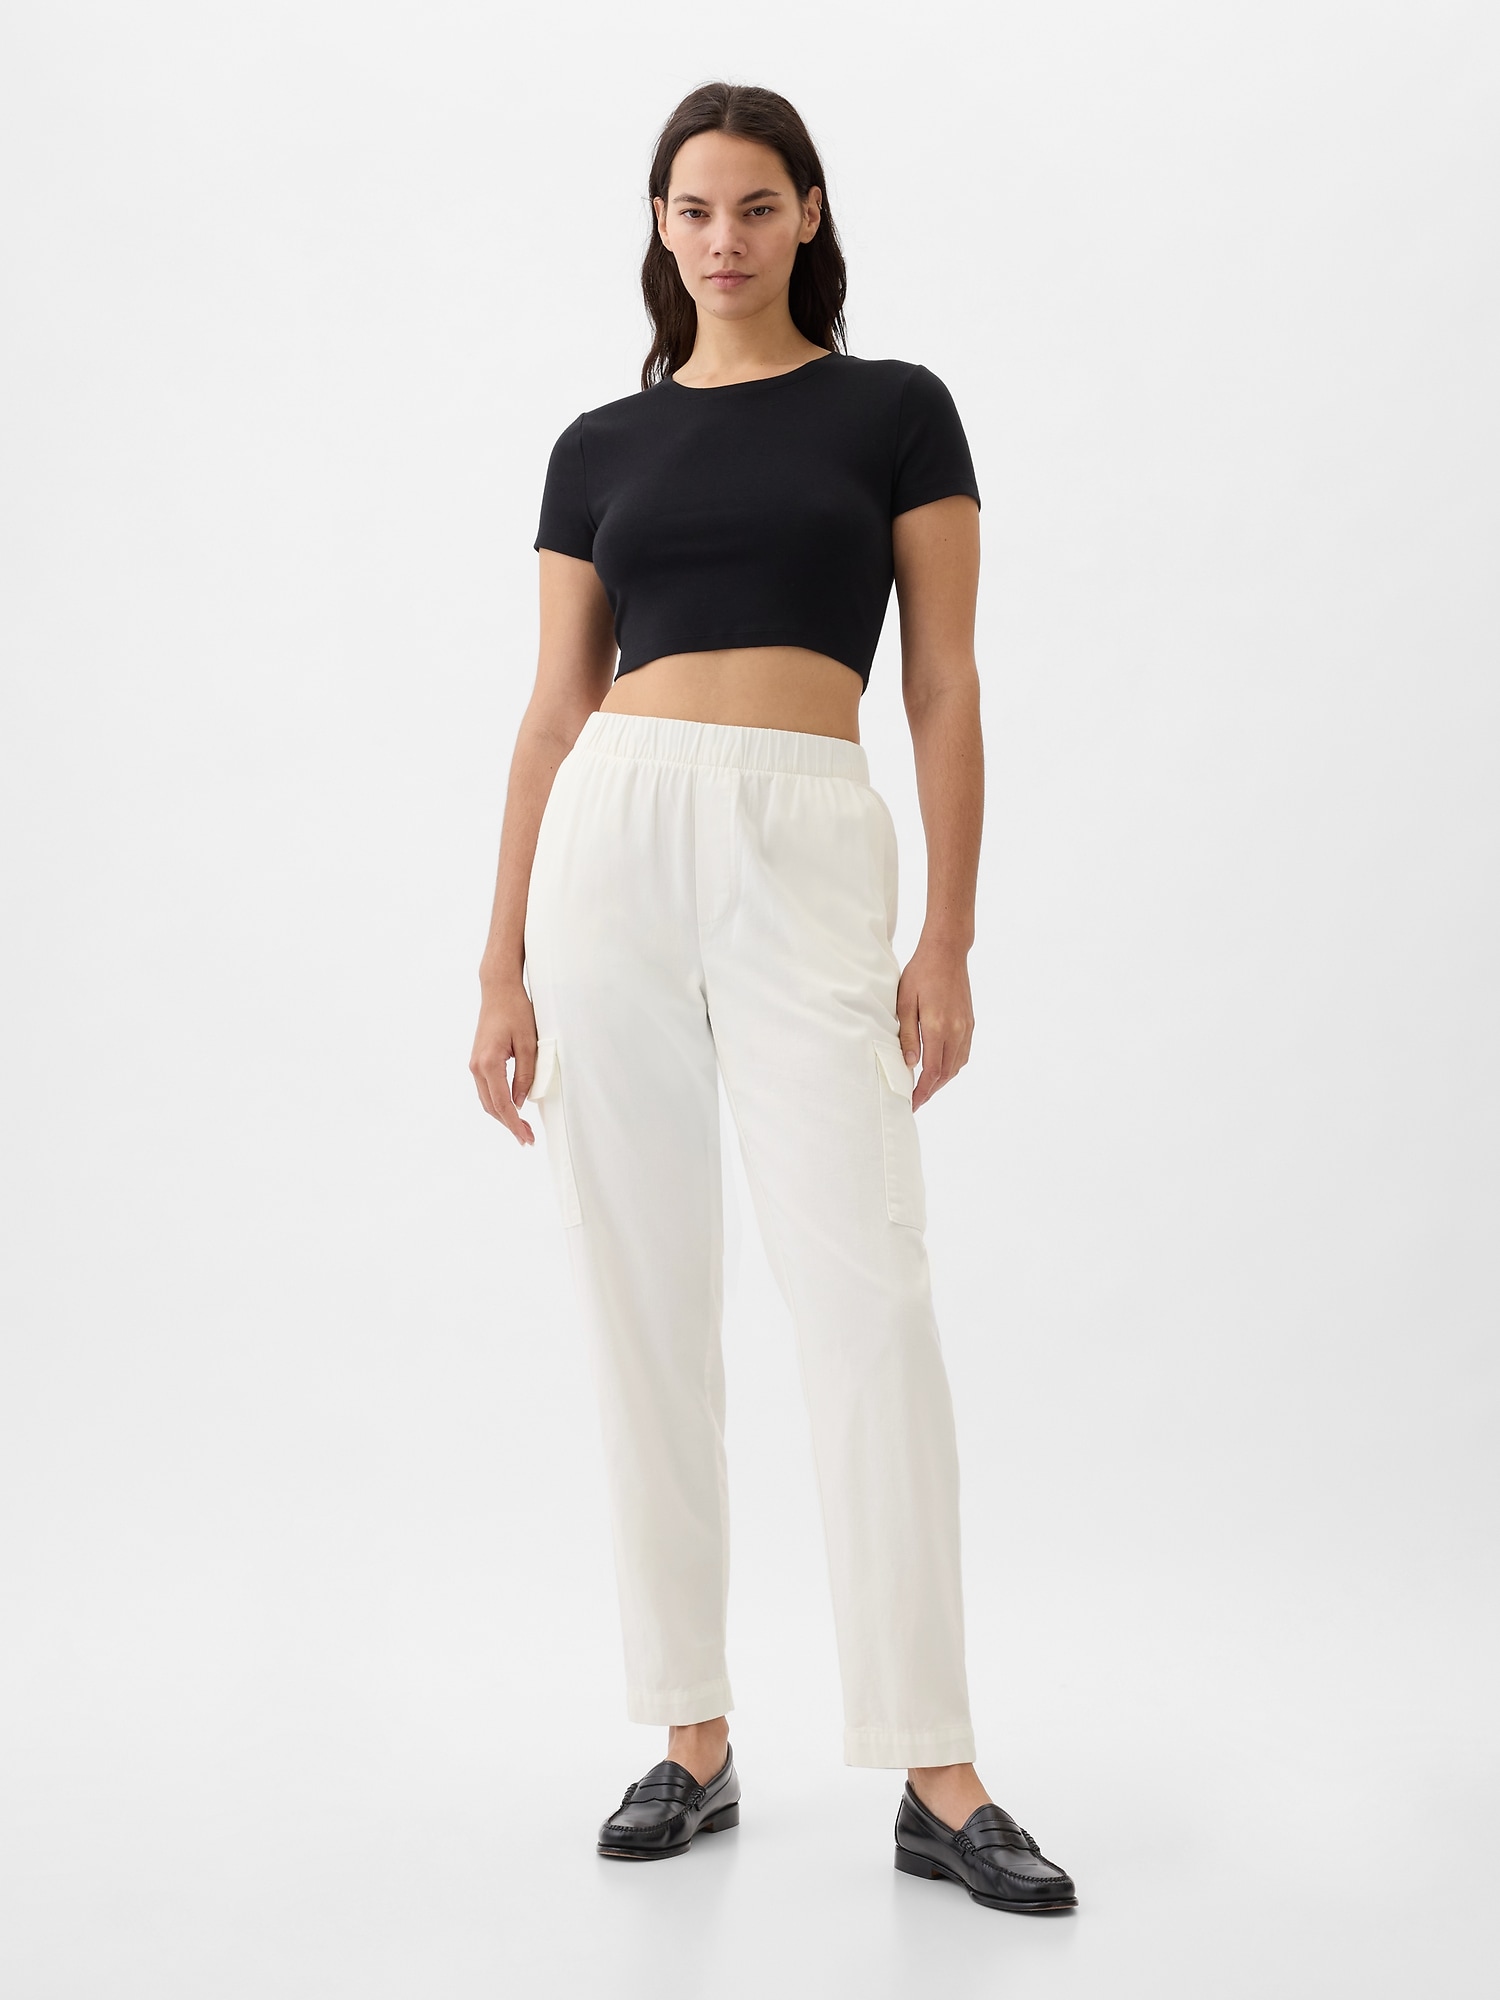 OFF WHITE TROUSERS PANTS FOR WOMENS AND GIRLS 100% COTTON